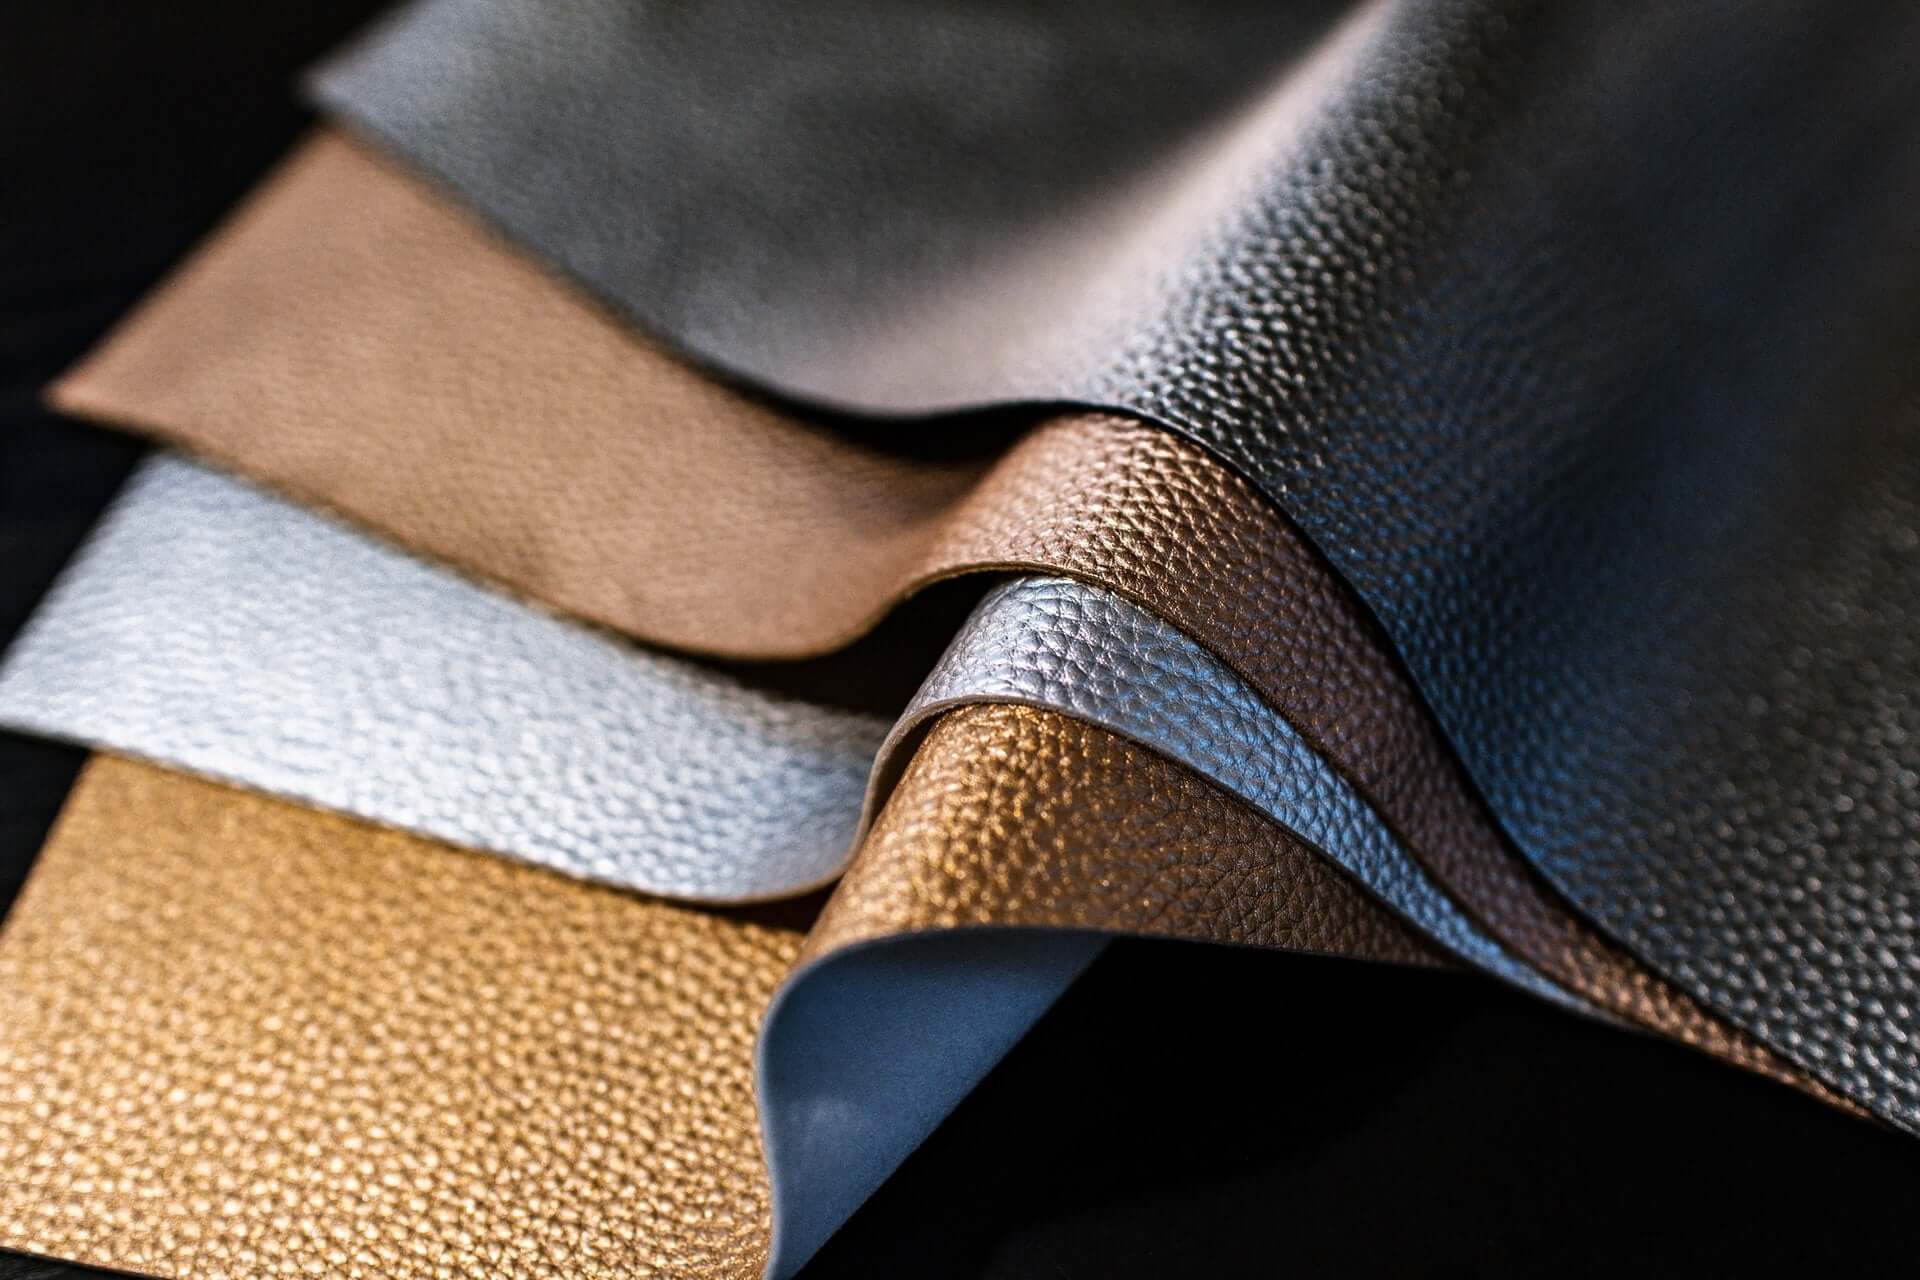 Four sheets of leather, in black, tan, silver, and gold.